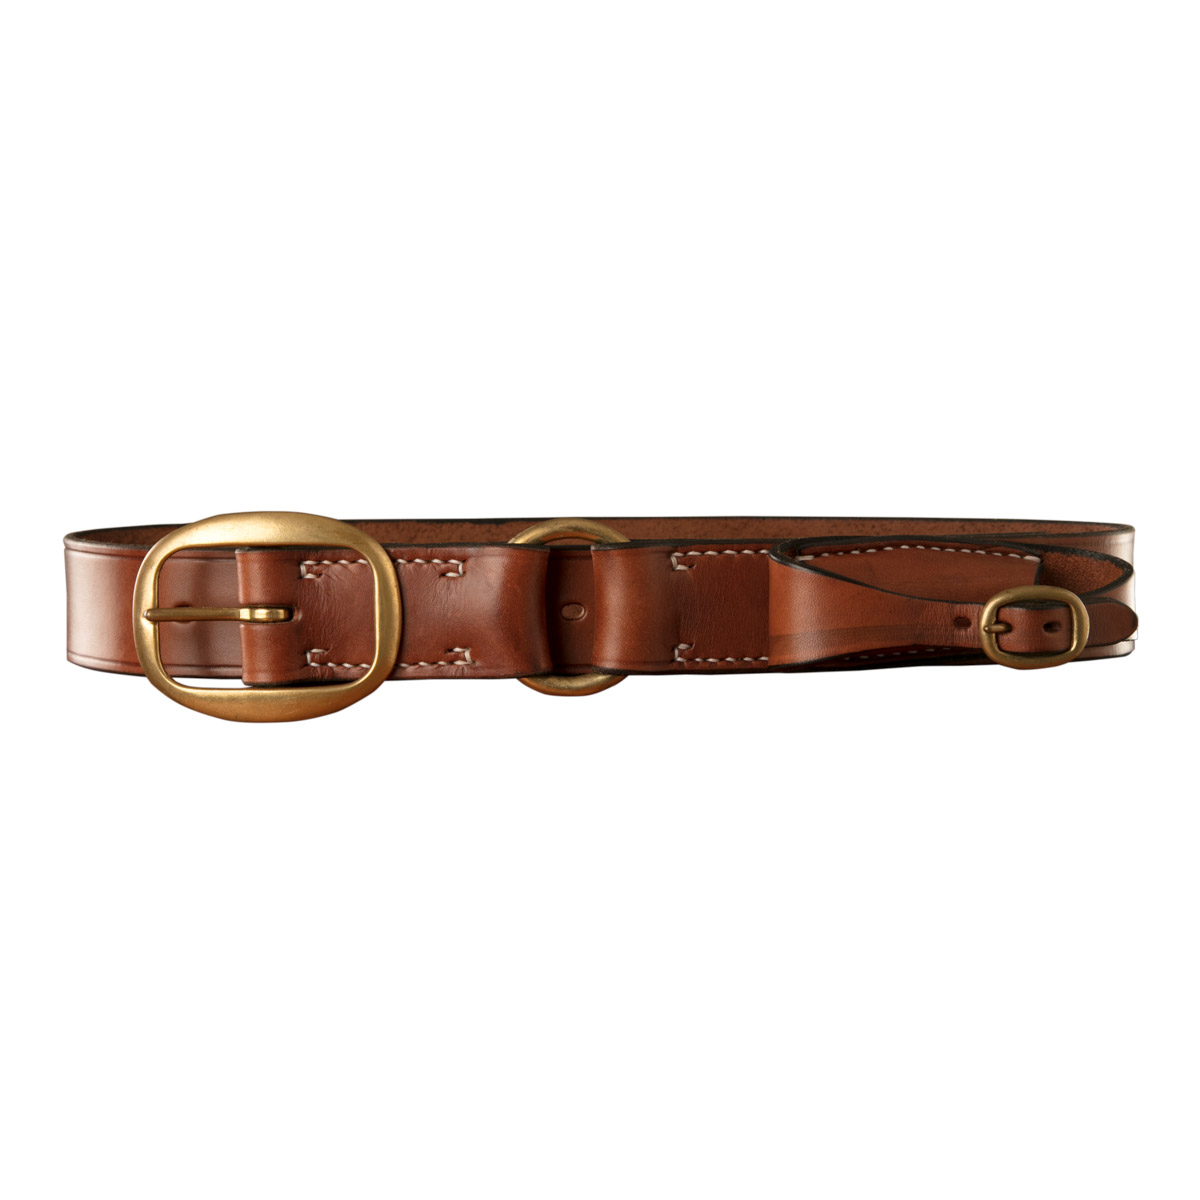 Stockmans Belt, Solid Leather, with Brass Swage Buckle, Ring and Pouch for Pocket Knife 1